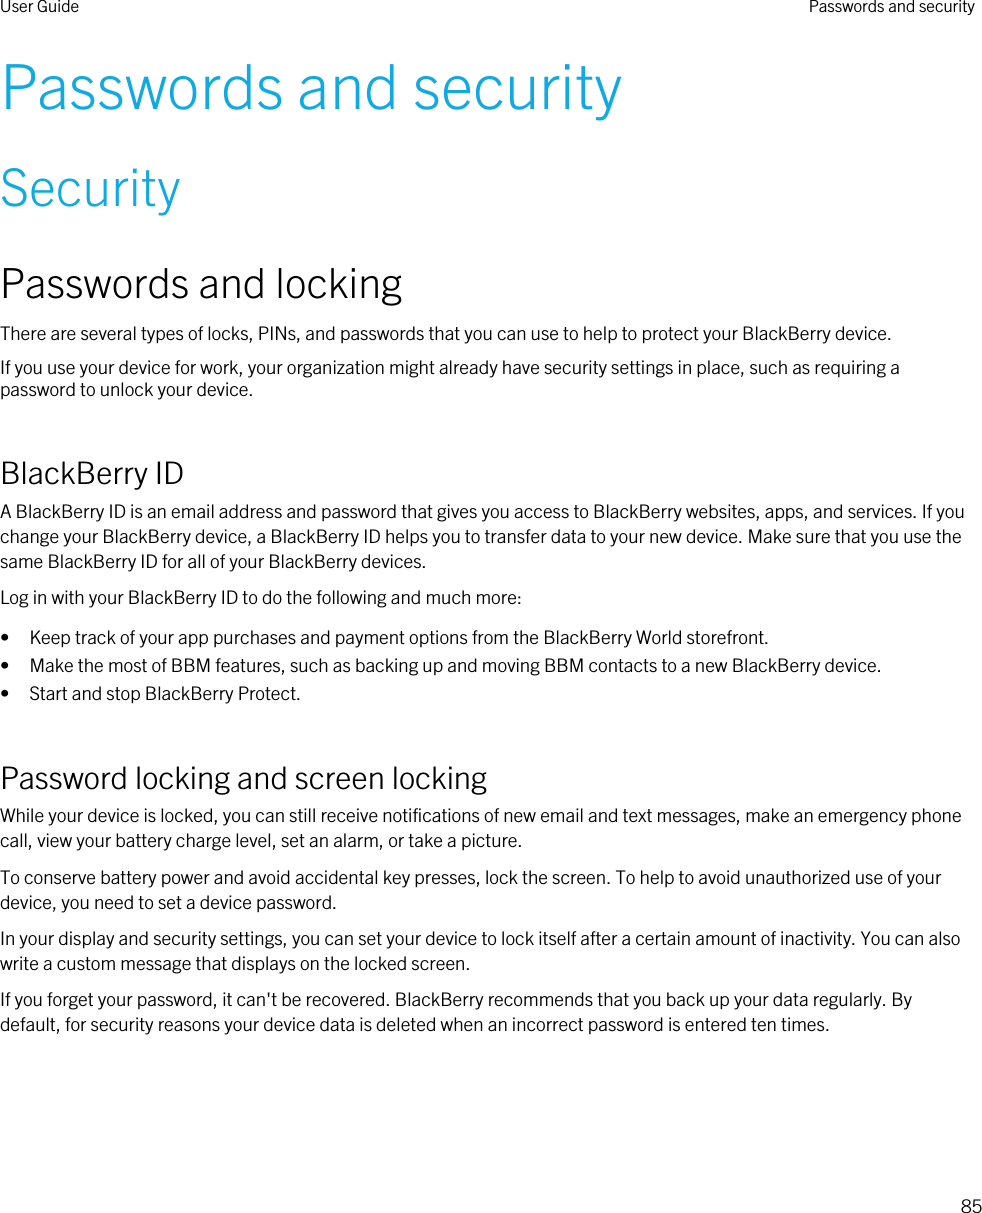 Passwords and securitySecurityPasswords and lockingThere are several types of locks, PINs, and passwords that you can use to help to protect your BlackBerry device.If you use your device for work, your organization might already have security settings in place, such as requiring a password to unlock your device.BlackBerry IDA BlackBerry ID is an email address and password that gives you access to BlackBerry websites, apps, and services. If you change your BlackBerry device, a BlackBerry ID helps you to transfer data to your new device. Make sure that you use the same BlackBerry ID for all of your BlackBerry devices.Log in with your BlackBerry ID to do the following and much more:• Keep track of your app purchases and payment options from the BlackBerry World storefront.• Make the most of BBM features, such as backing up and moving BBM contacts to a new BlackBerry device.• Start and stop BlackBerry Protect.Password locking and screen lockingWhile your device is locked, you can still receive notifications of new email and text messages, make an emergency phone call, view your battery charge level, set an alarm, or take a picture.To conserve battery power and avoid accidental key presses, lock the screen. To help to avoid unauthorized use of your device, you need to set a device password.In your display and security settings, you can set your device to lock itself after a certain amount of inactivity. You can also write a custom message that displays on the locked screen.If you forget your password, it can&apos;t be recovered. BlackBerry recommends that you back up your data regularly. By default, for security reasons your device data is deleted when an incorrect password is entered ten times.User Guide Passwords and security85